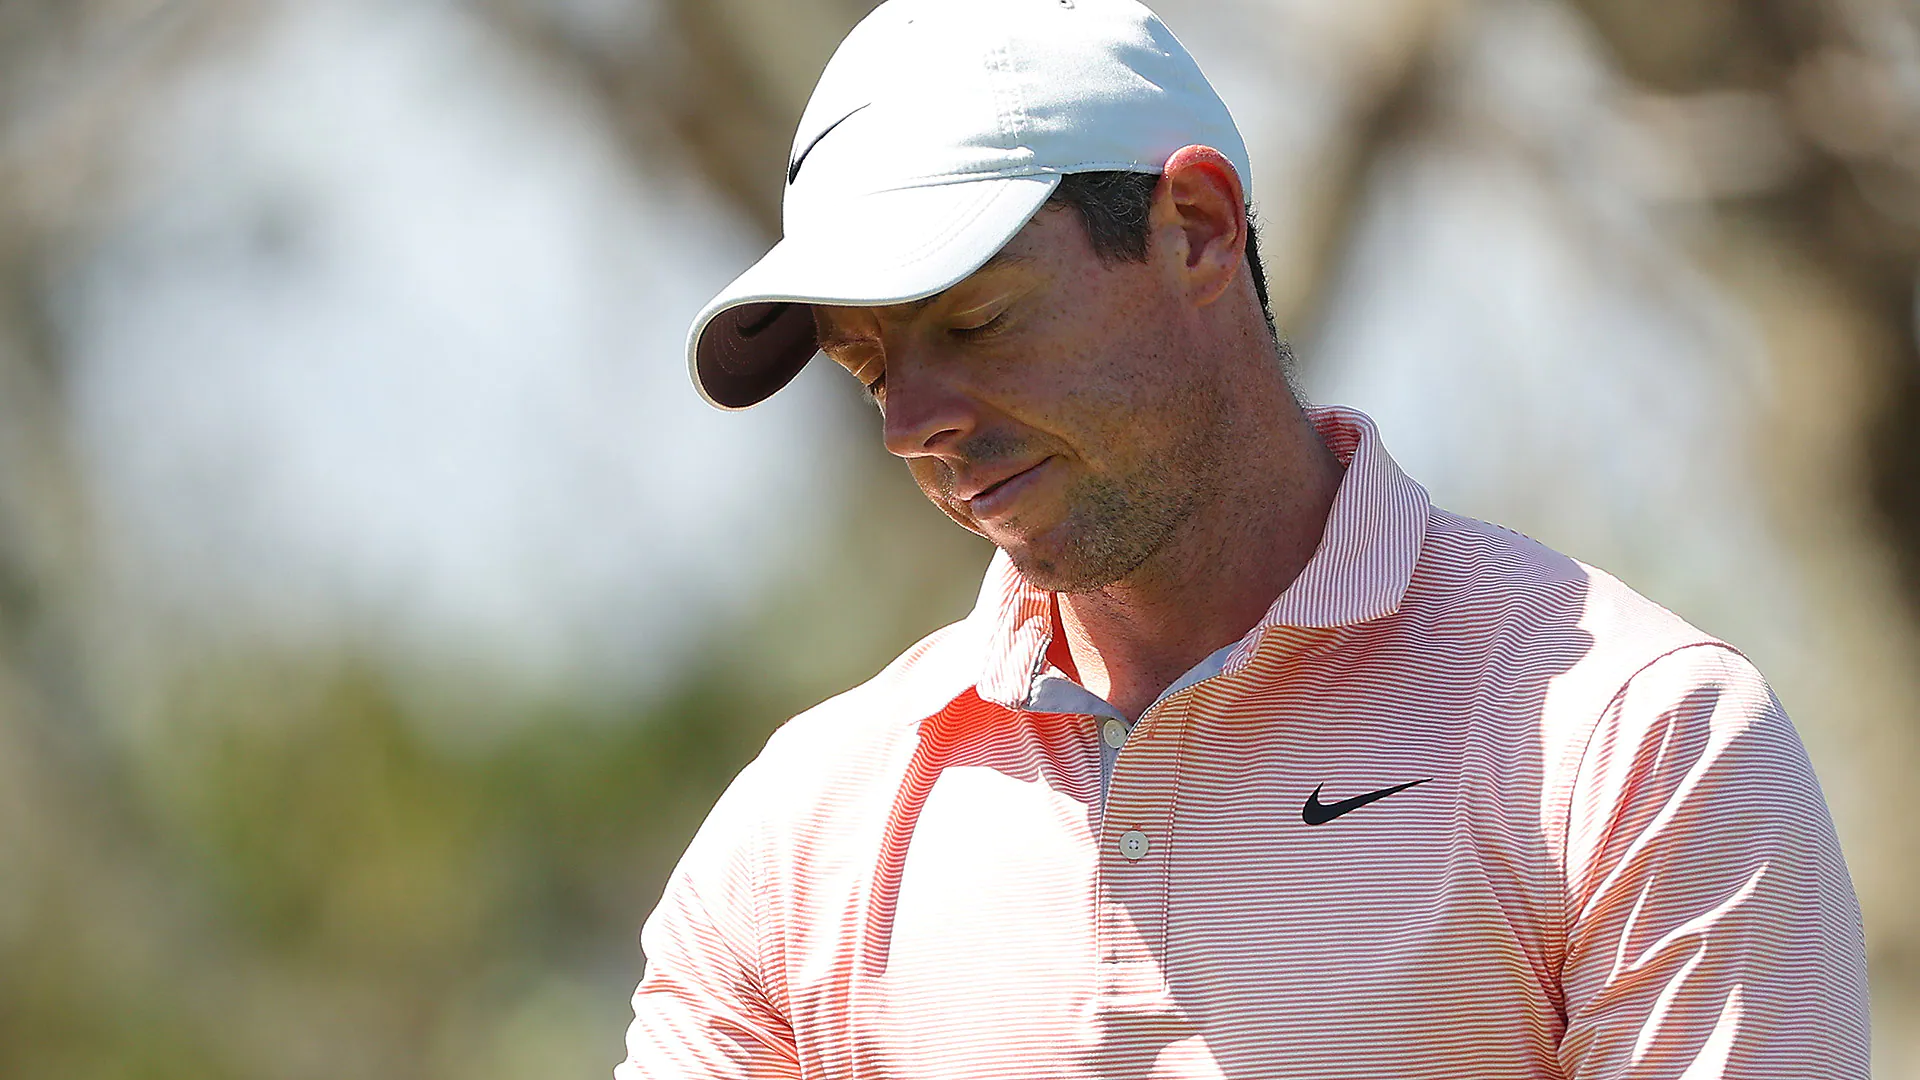 Rory McIlroy calls Bay Hill setup 'crazy golf' after another rough weekend 2